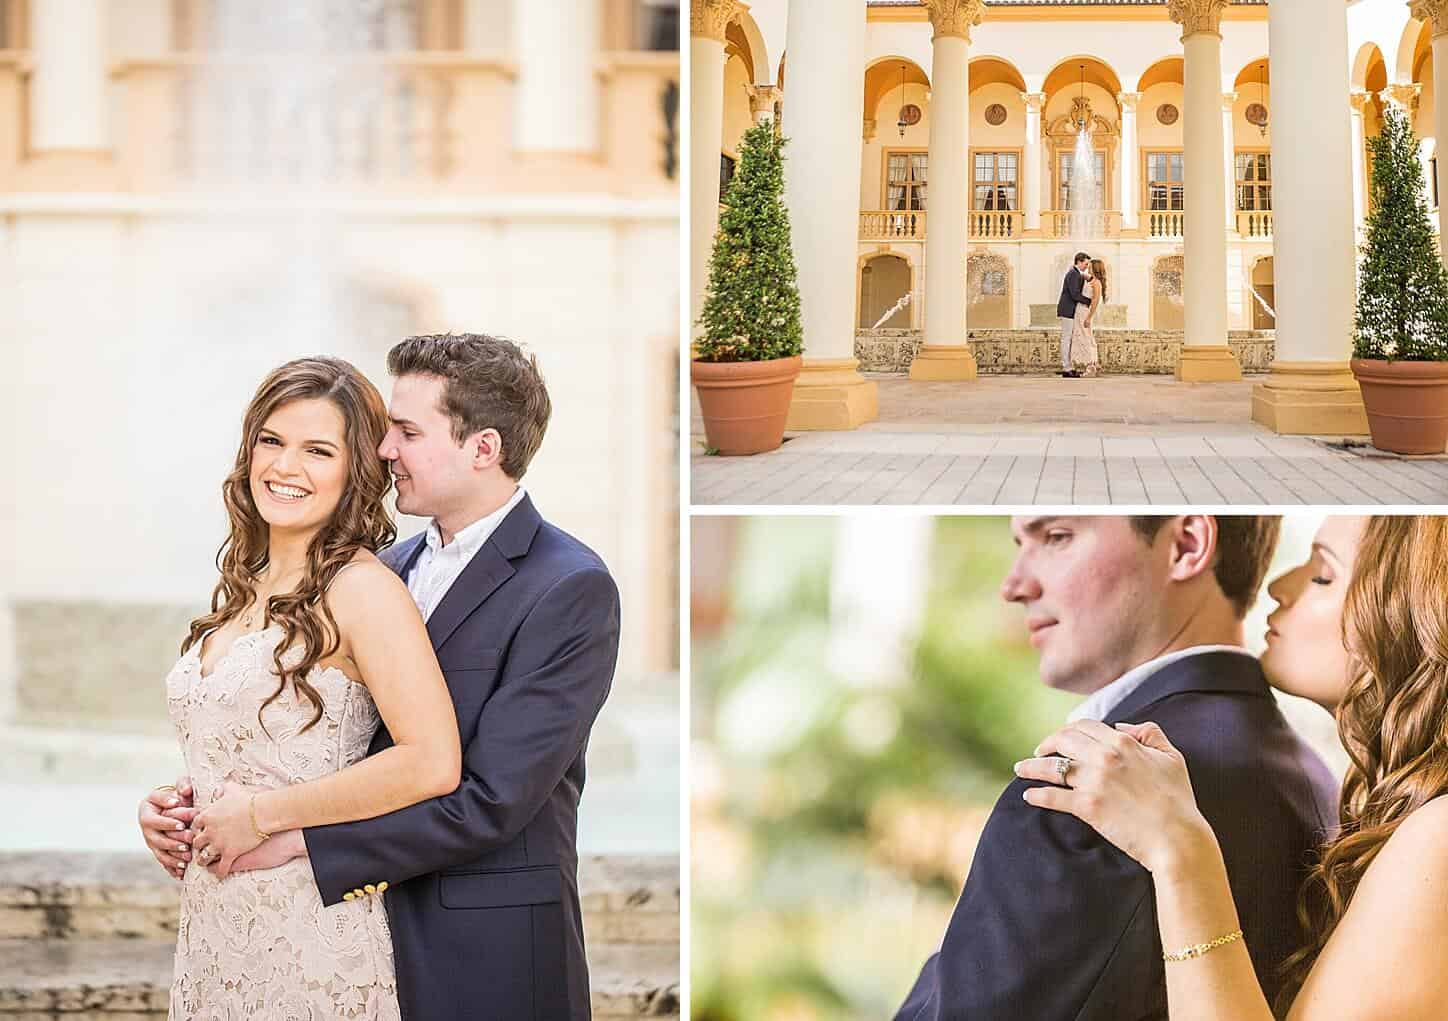 Couple at Biltmore Hotel Miami Coral Gables | Outfits for Engagement Photos